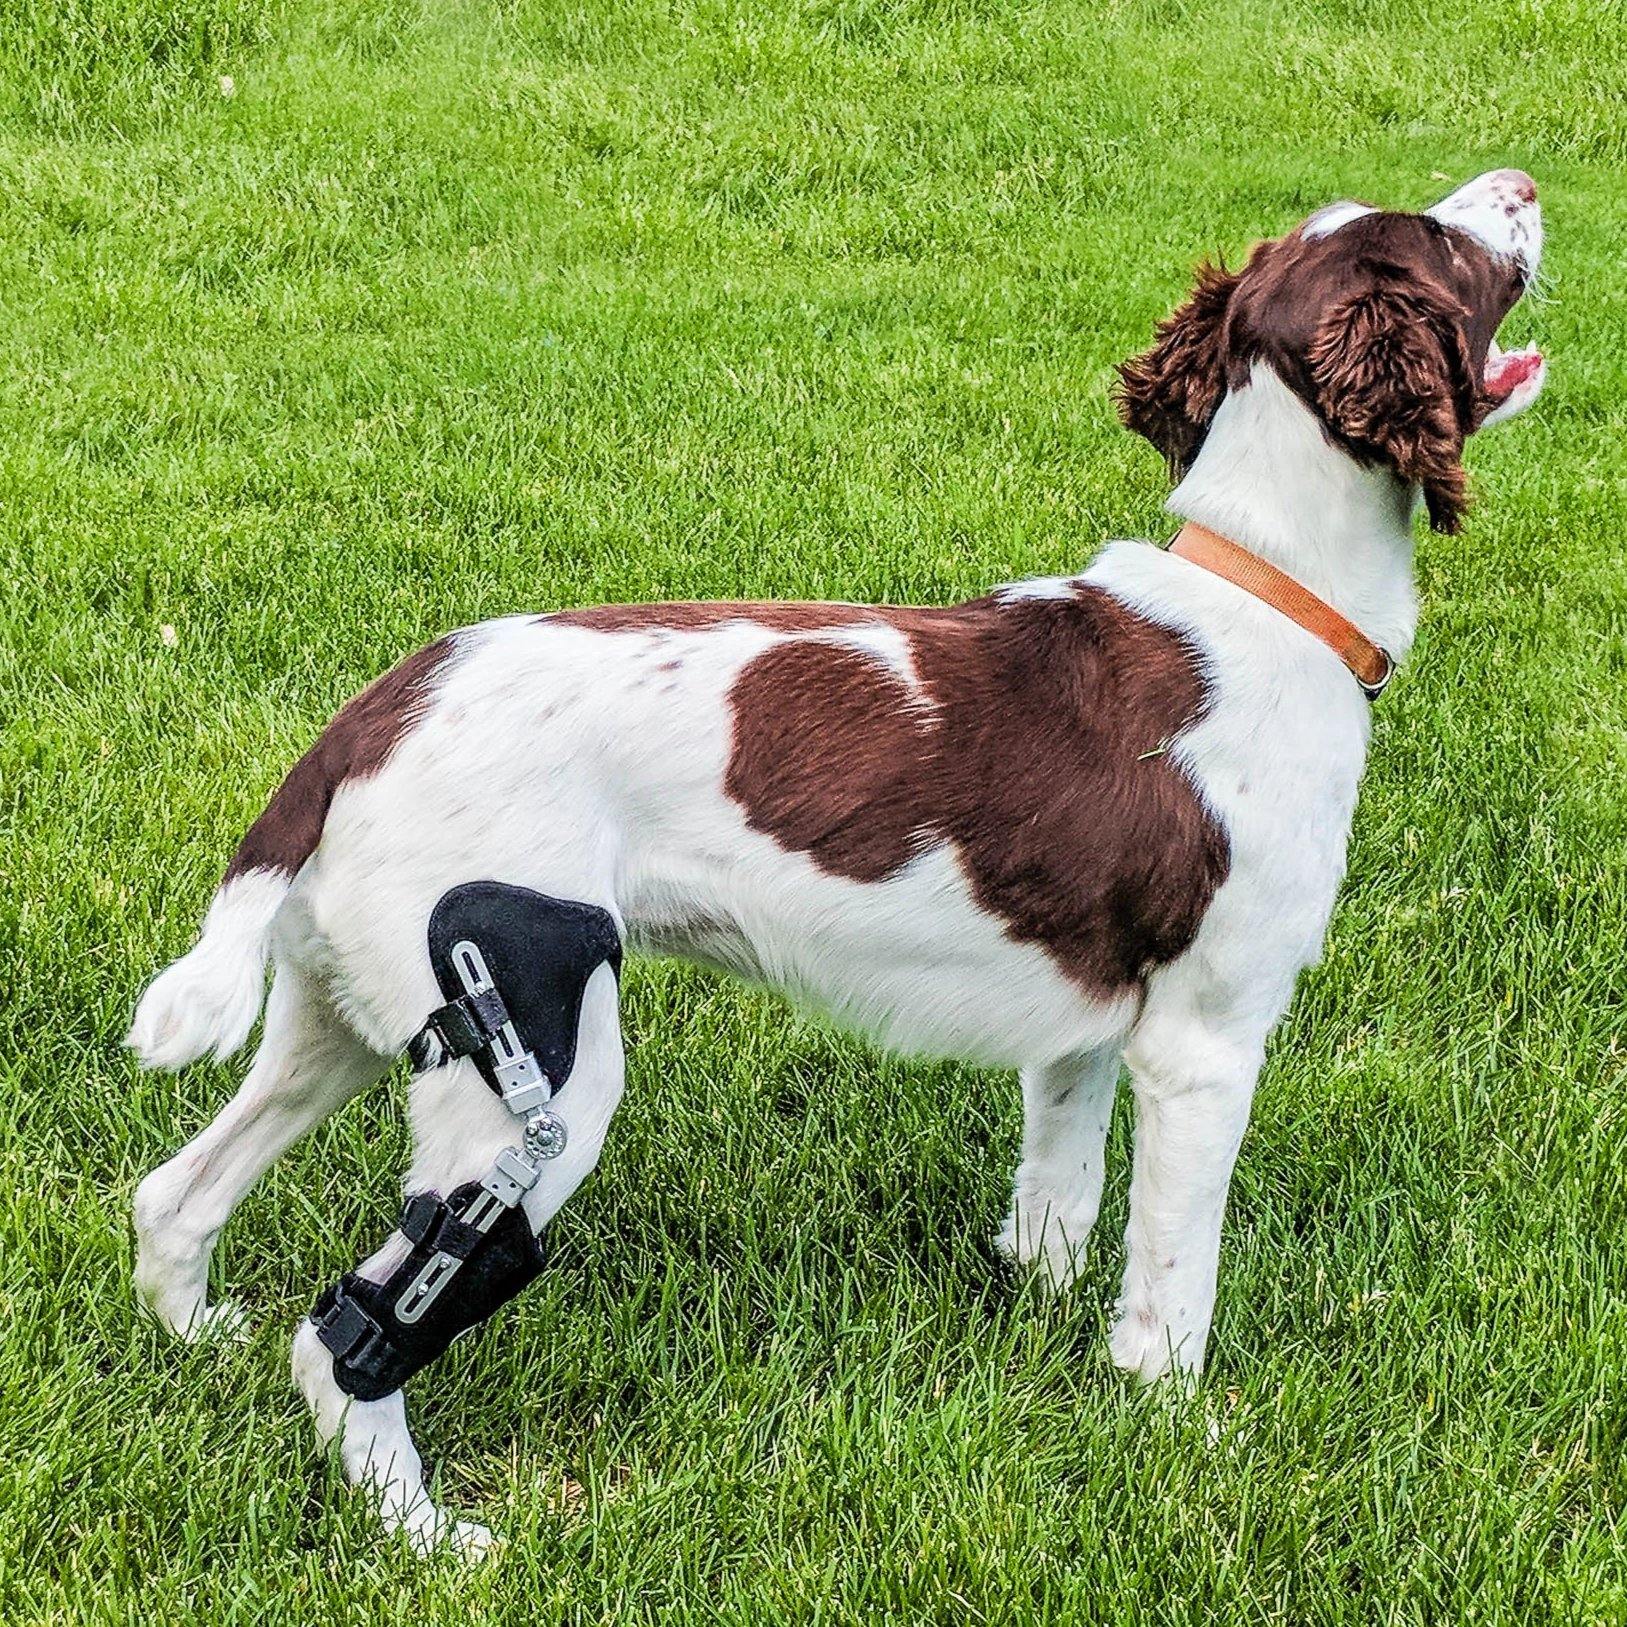 can a dog put weight on a torn acl